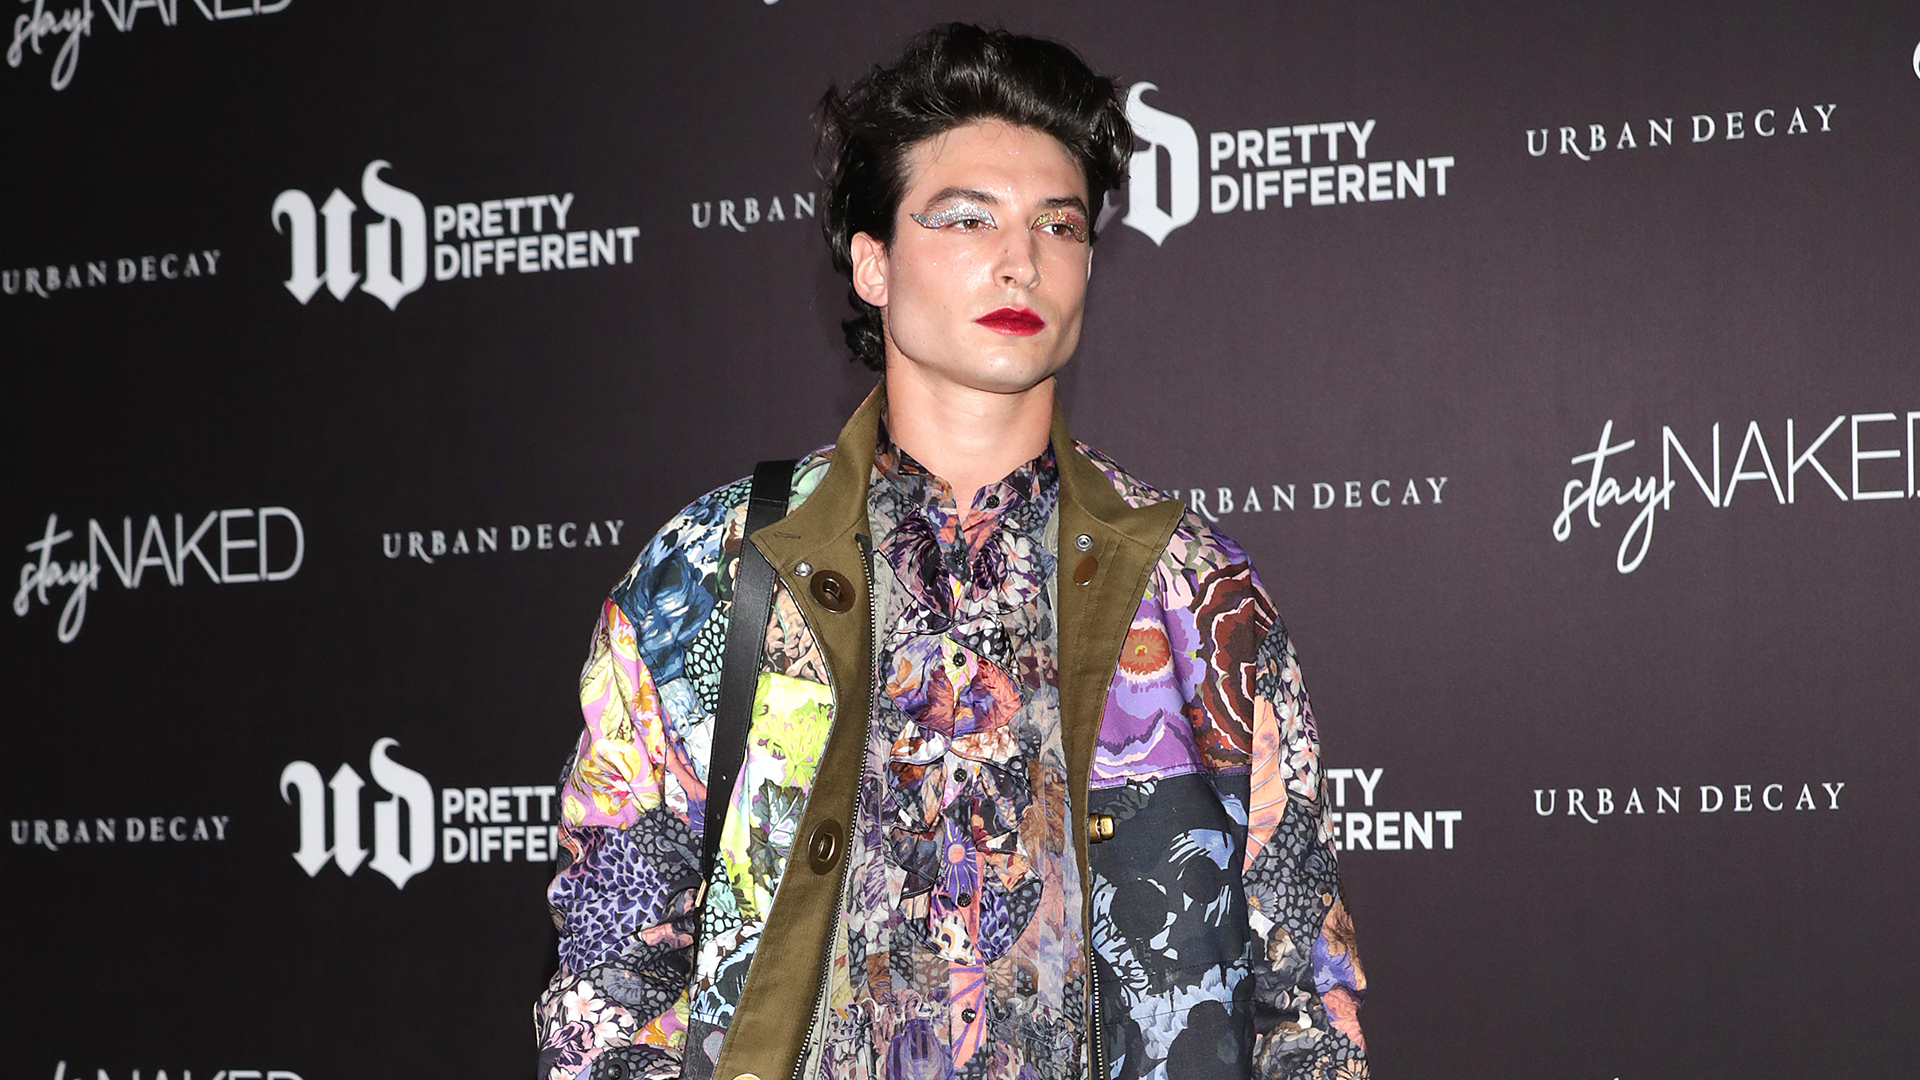 Ezra Miller Faces Backlash After Video Surfaces That Appears to Show Actor Choking Woman